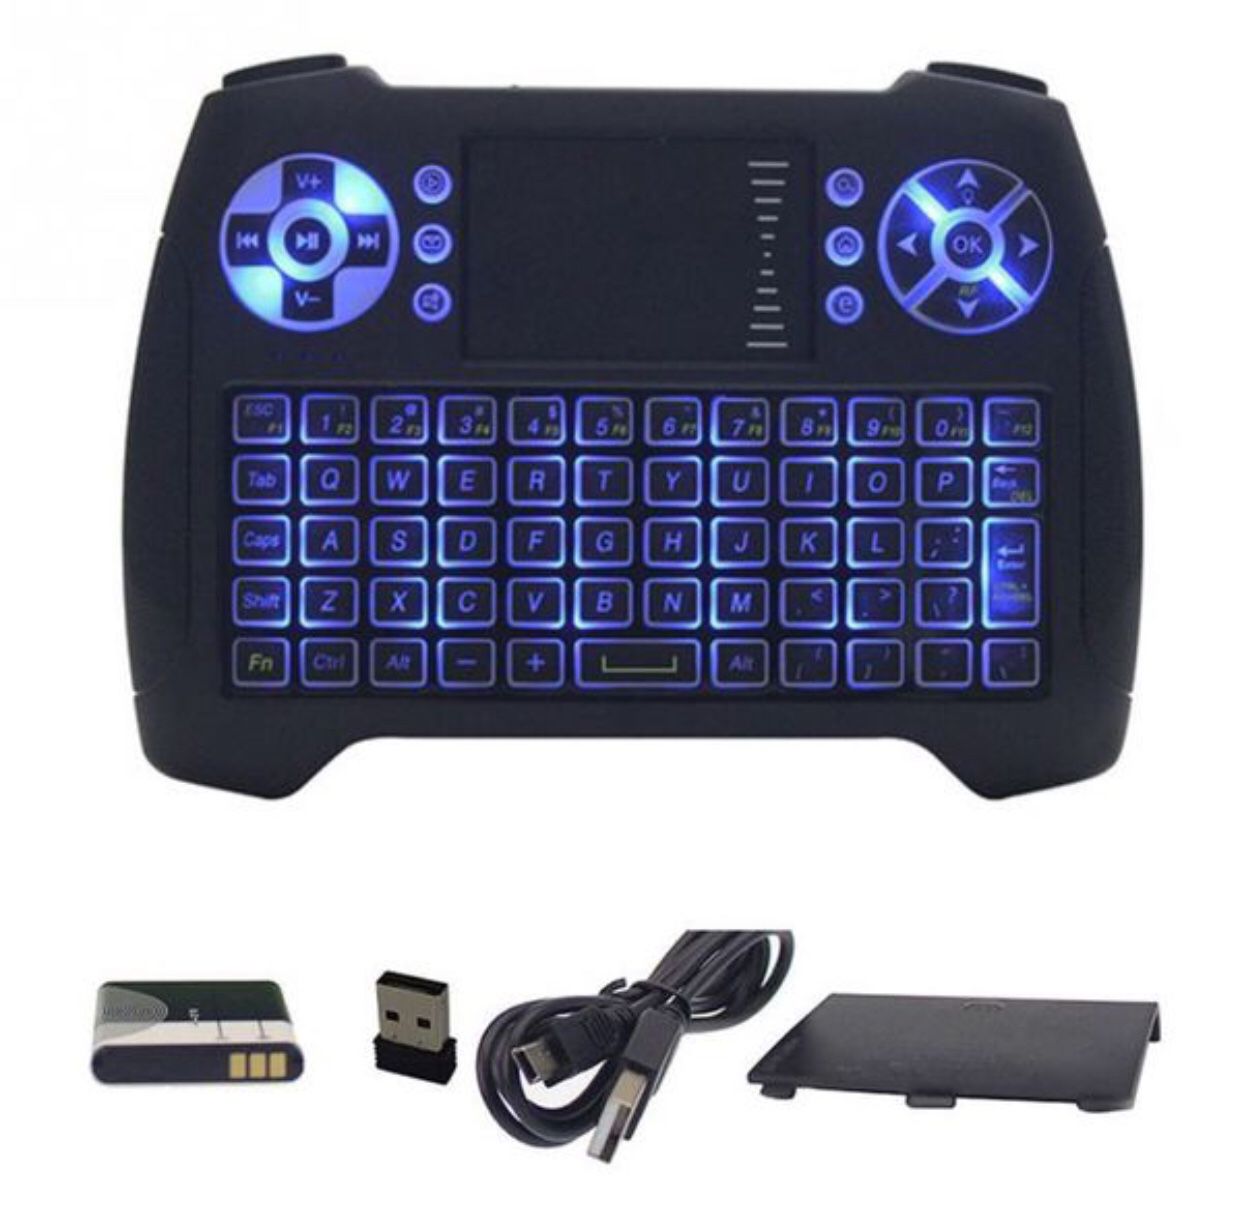 Backlit Wireless Mini Keyboard with Touchpad Mouse and Multimedia Keys